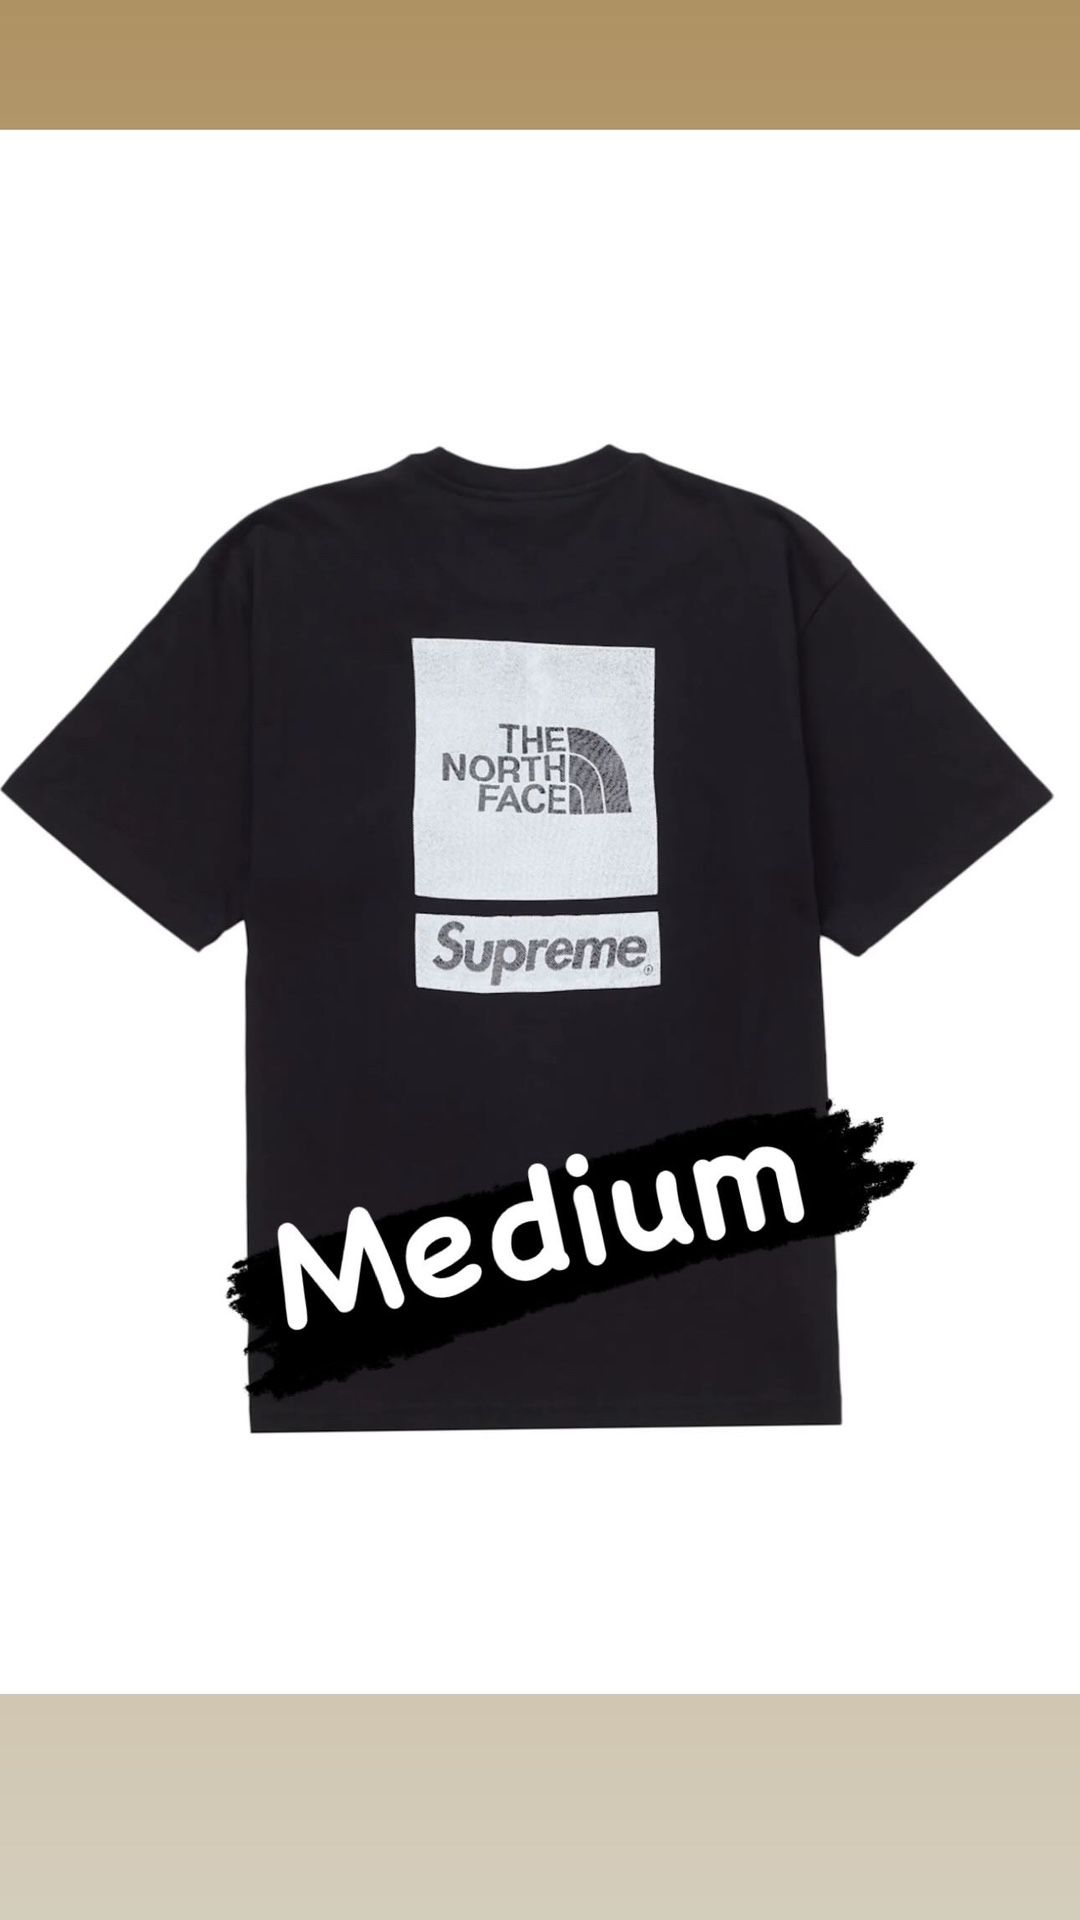 Supreme The North Face S/S Top Tee Black Size Medium 